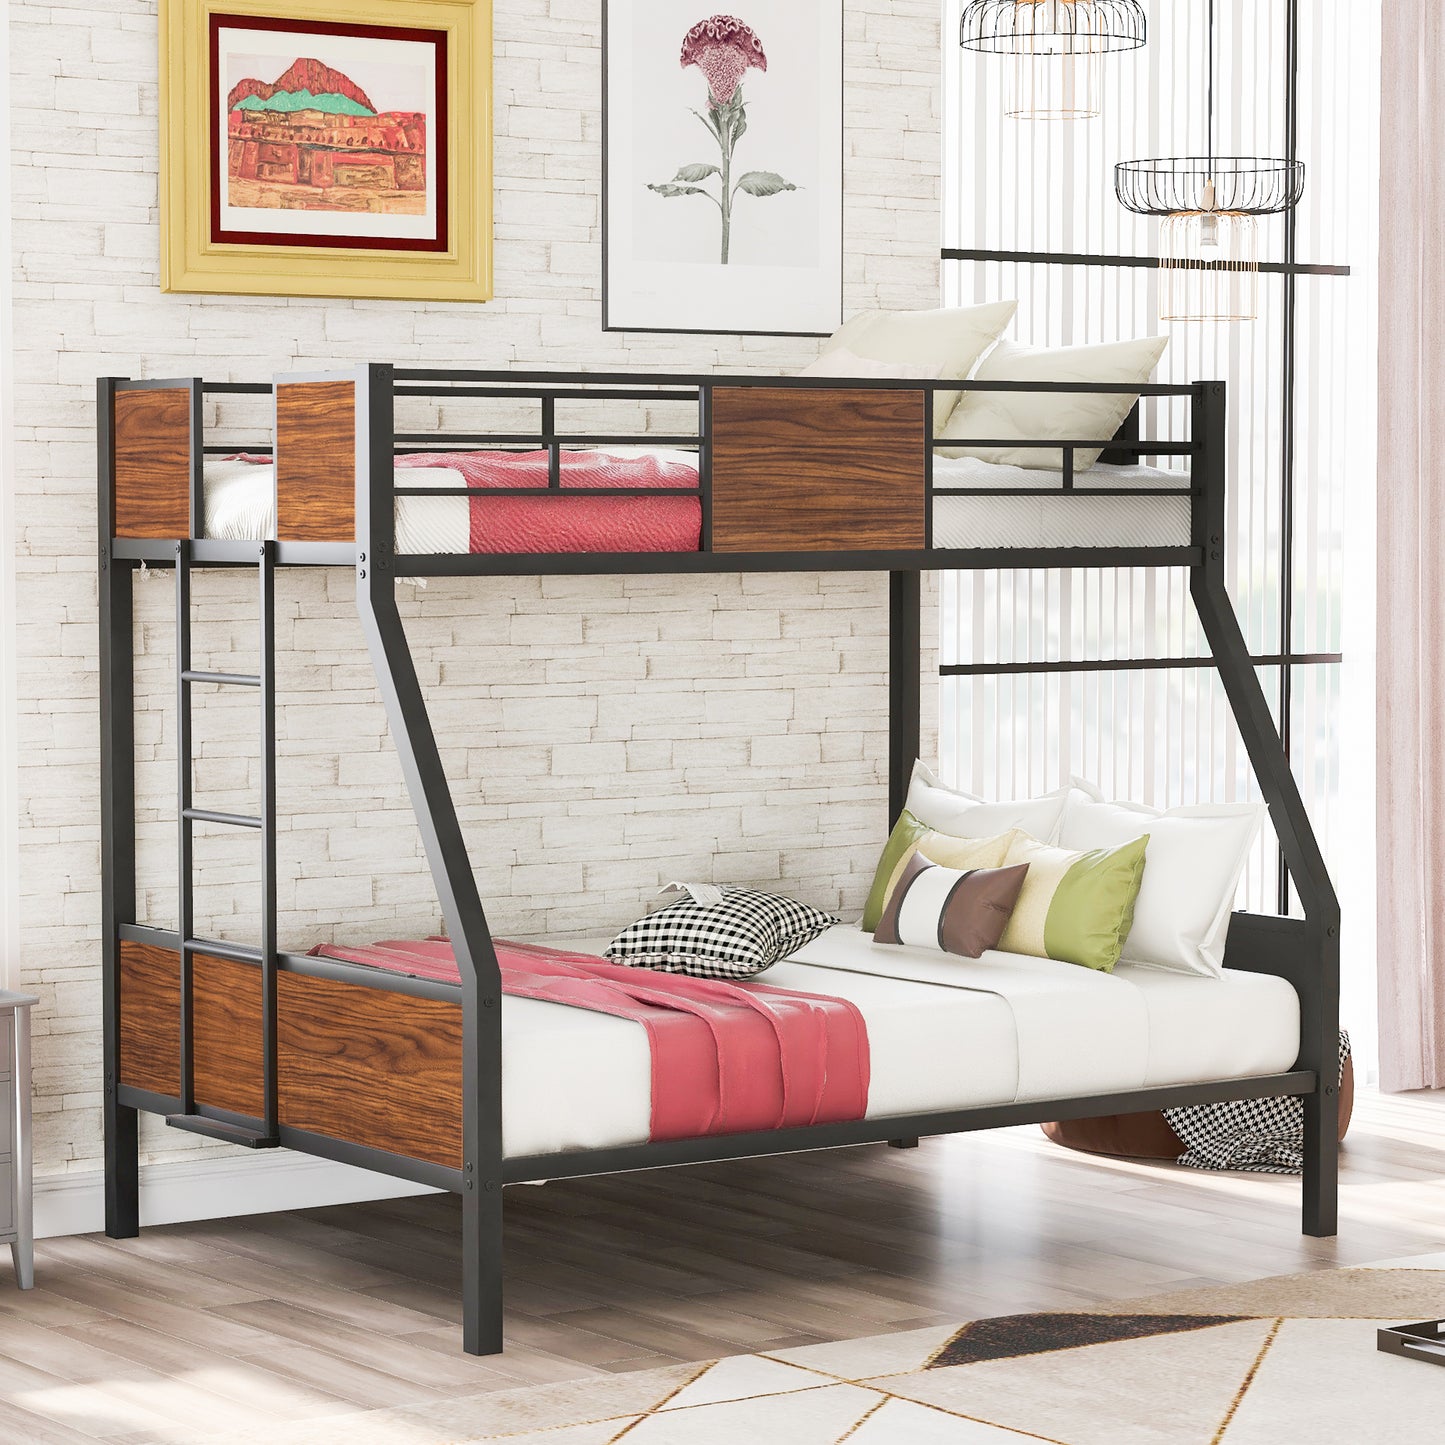 Twin-over-full bunk bed modern style steel frame bunk bed with safety rail, built-in ladder for bedroom, dorm, boys, girls, adults